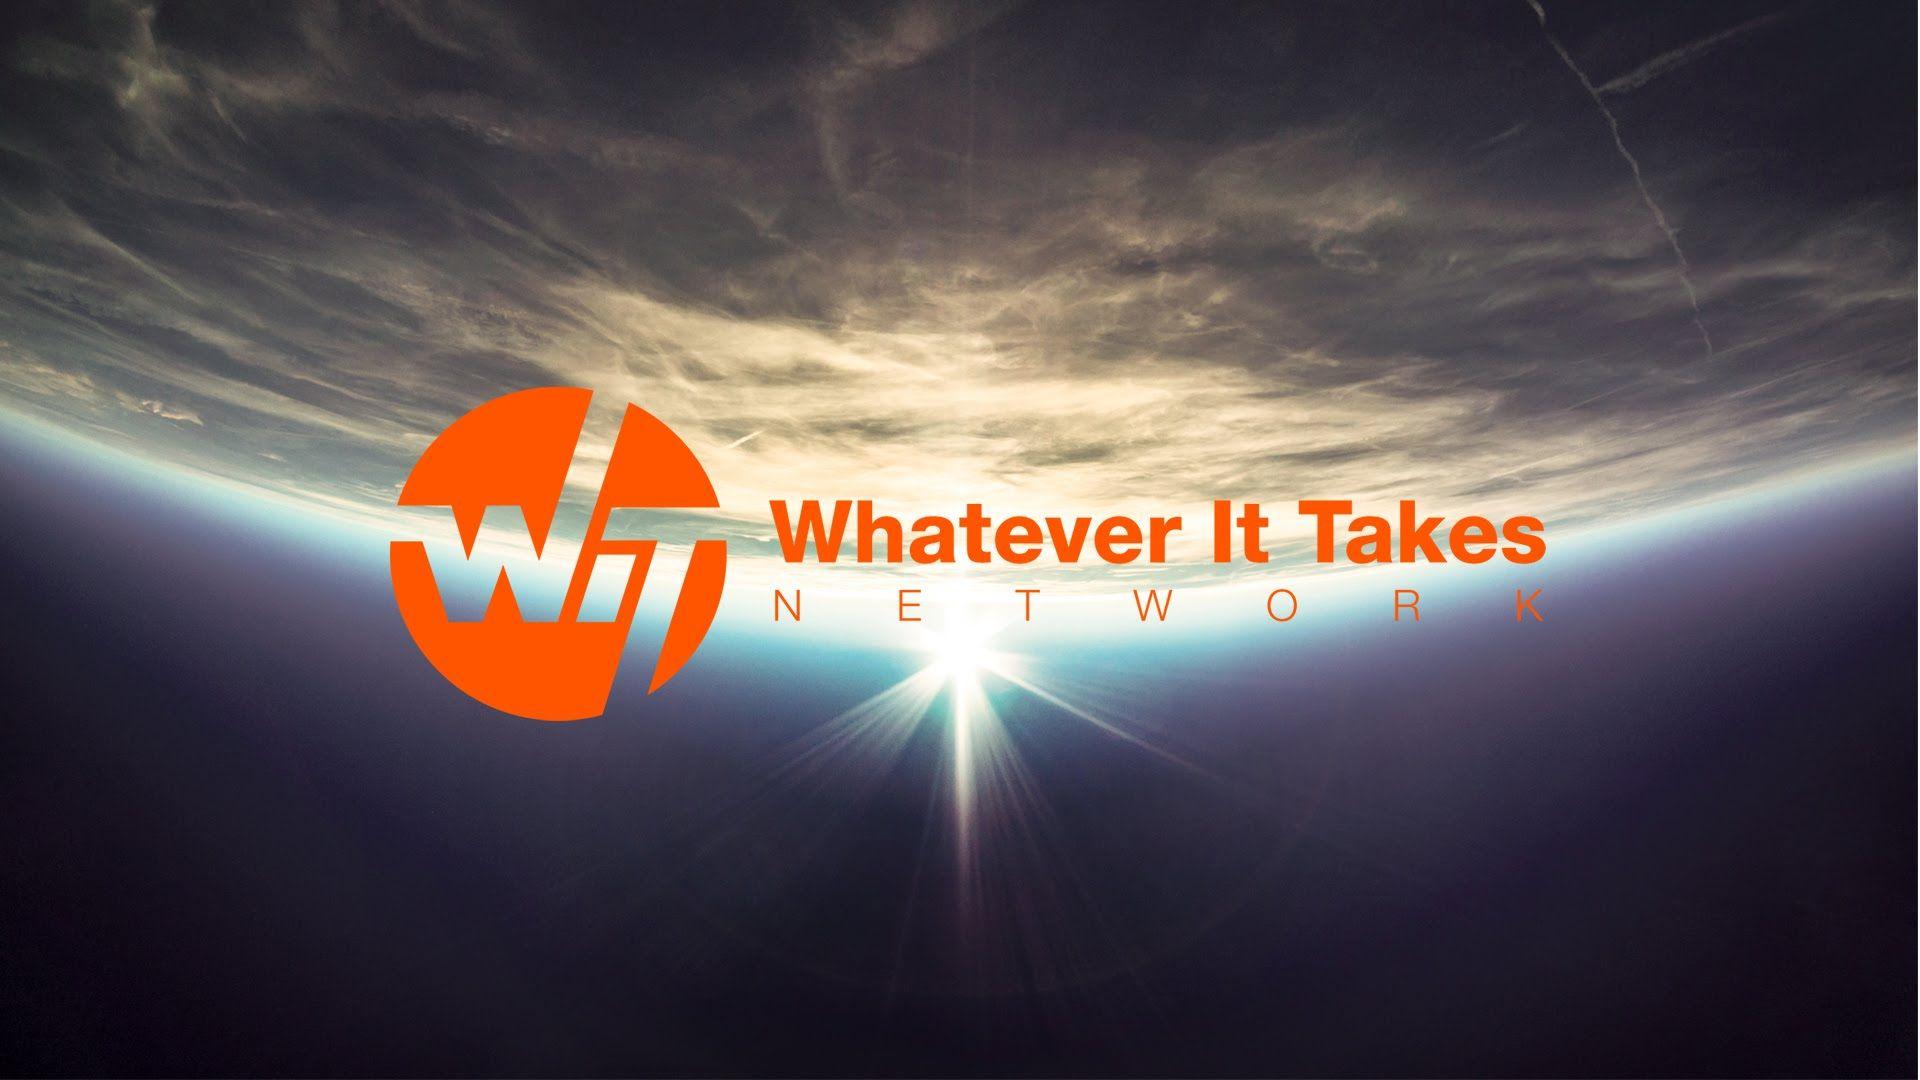 Whatever It Takes Movie Wallpaper